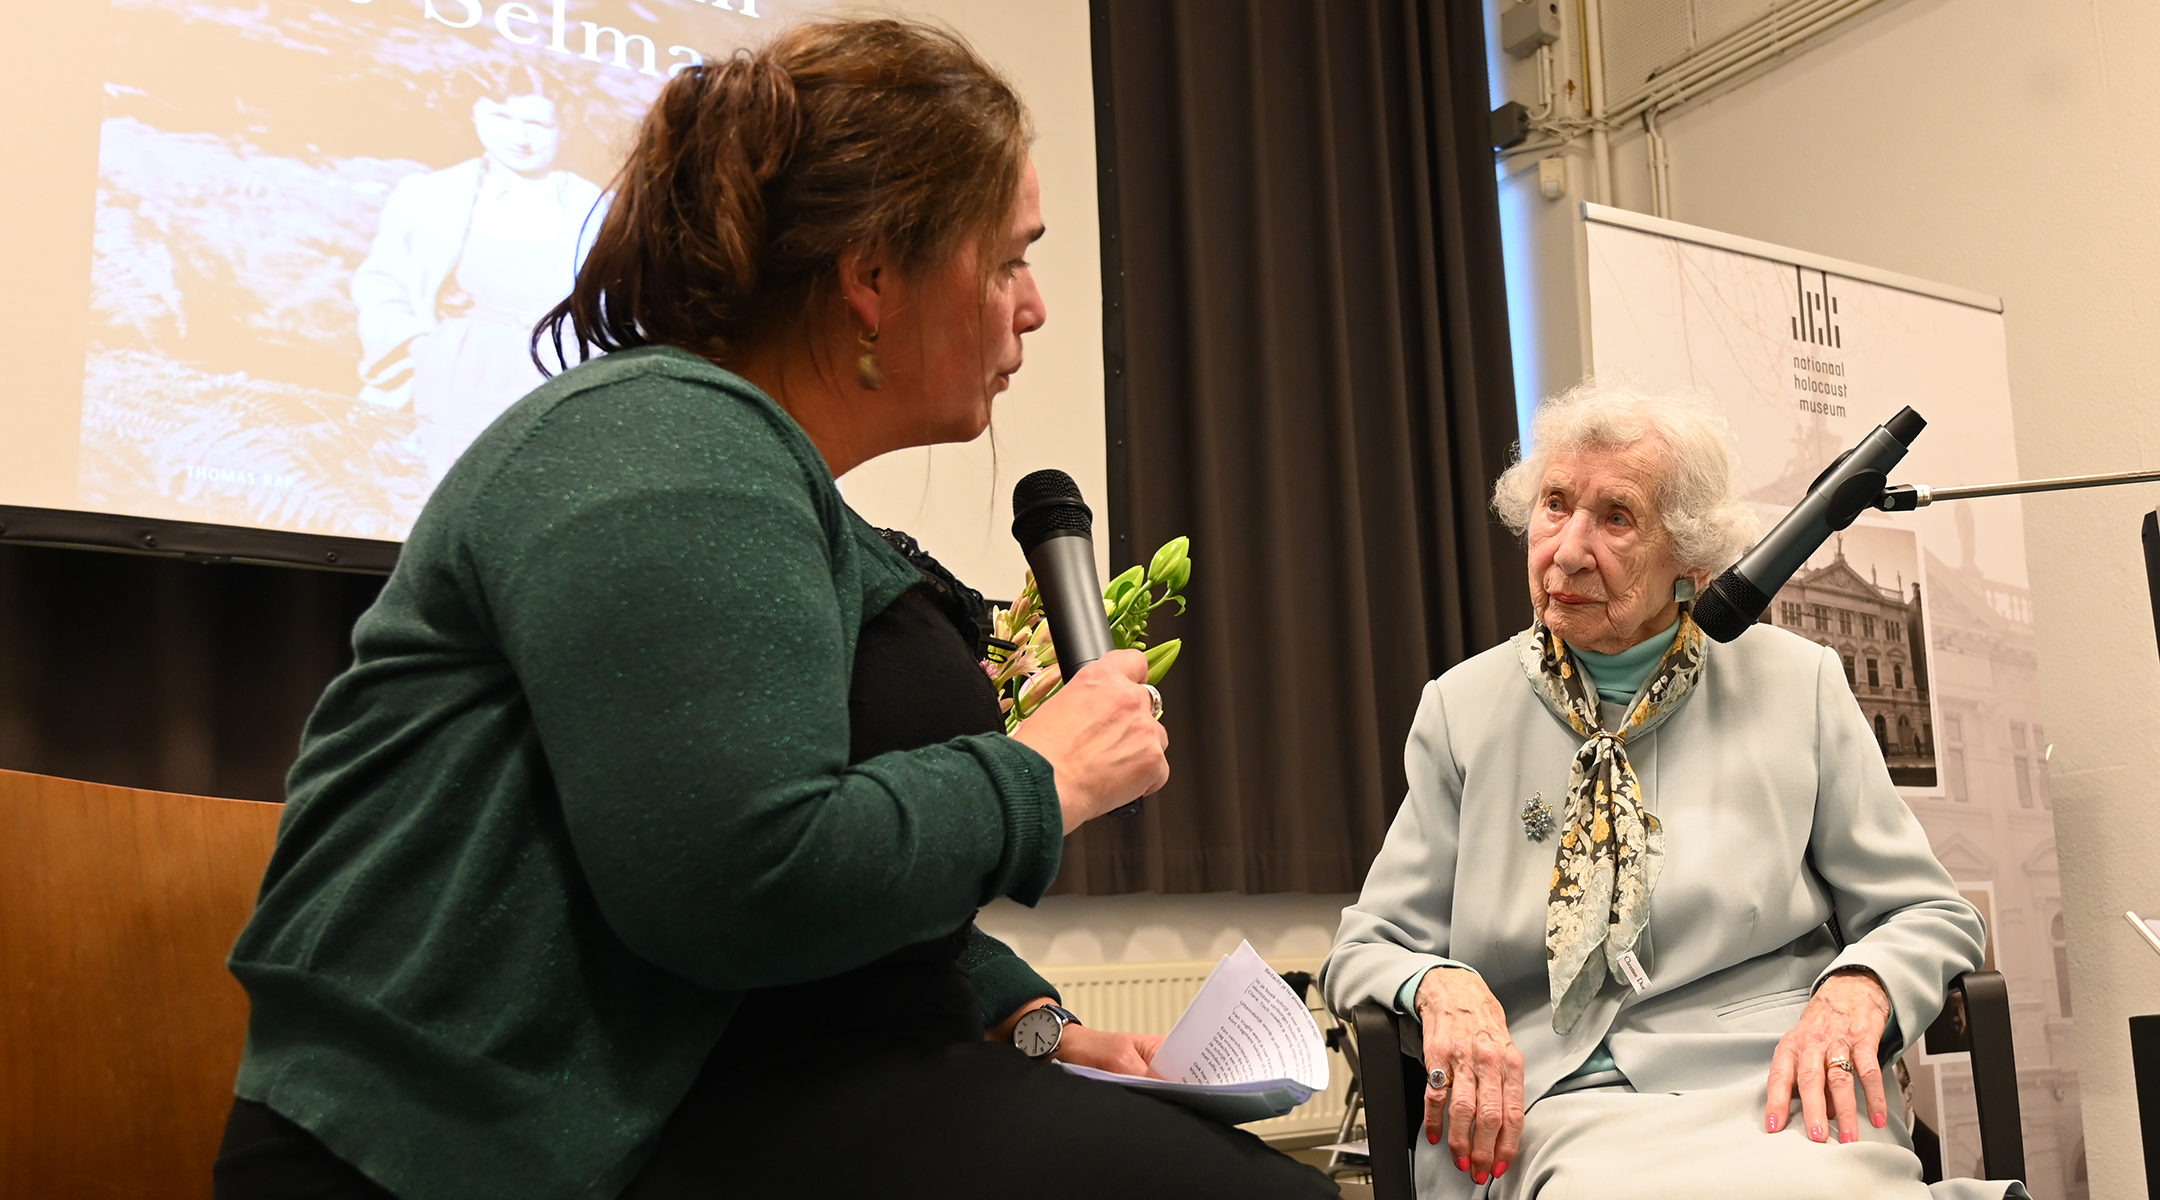 Selma van de Perre, right, being interviewed about her book at the National Holocaust Museum in Amsterdam, the Netherlands on Jan. 9, 2020. (Cnaan Liphshiz)